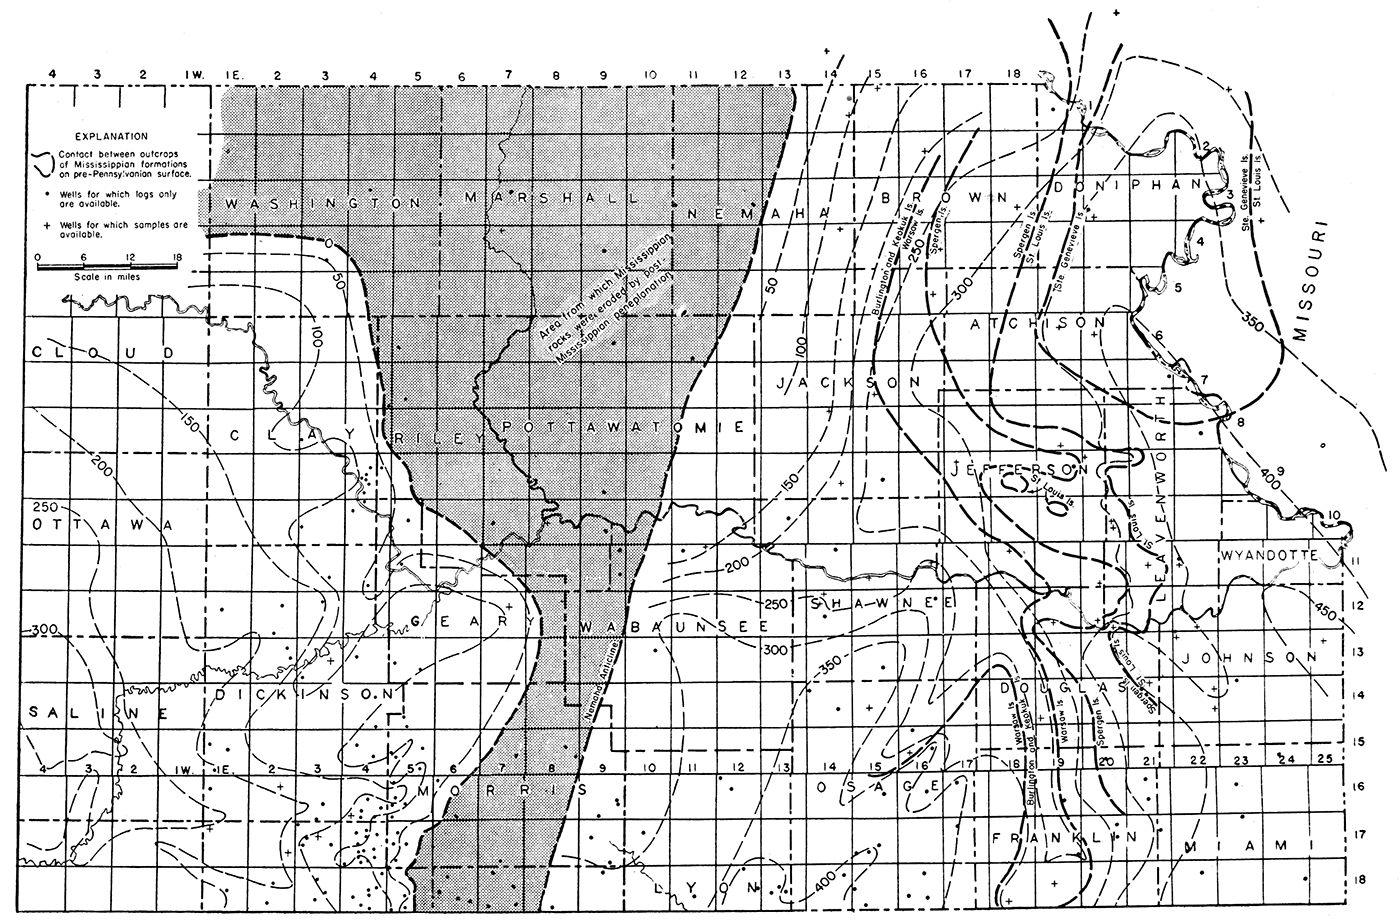 Map of northeastern Kansas showing thickness of Mississippian limestones and approximate distribution of Mississippian formations on pre-Pennsylvanian surface.